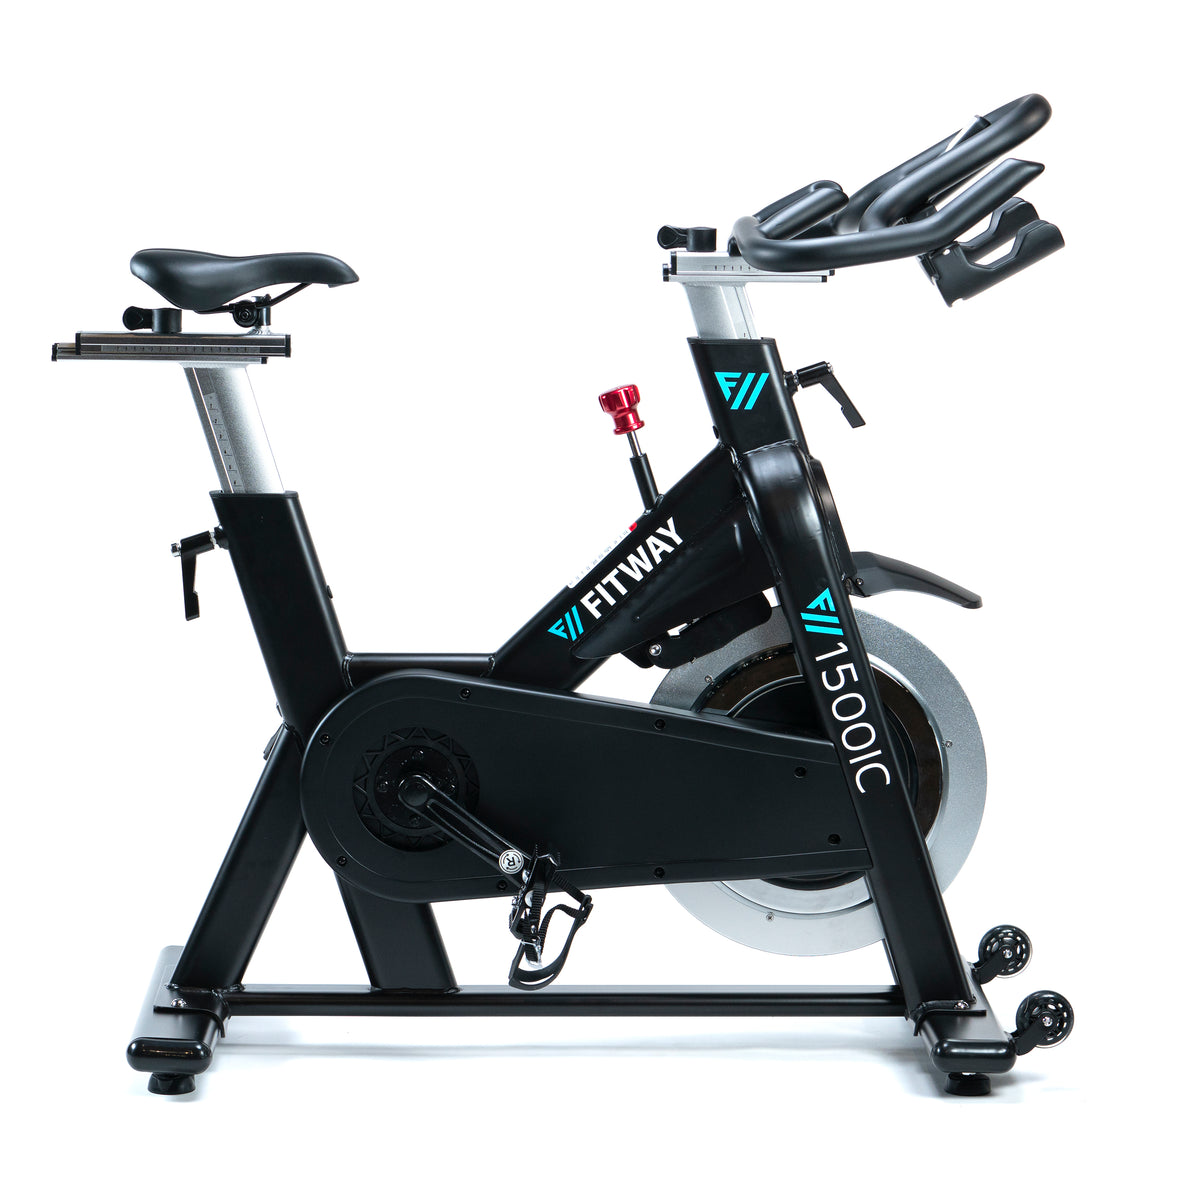 FitWay Equip. 1500IC Indoor Cycle side view